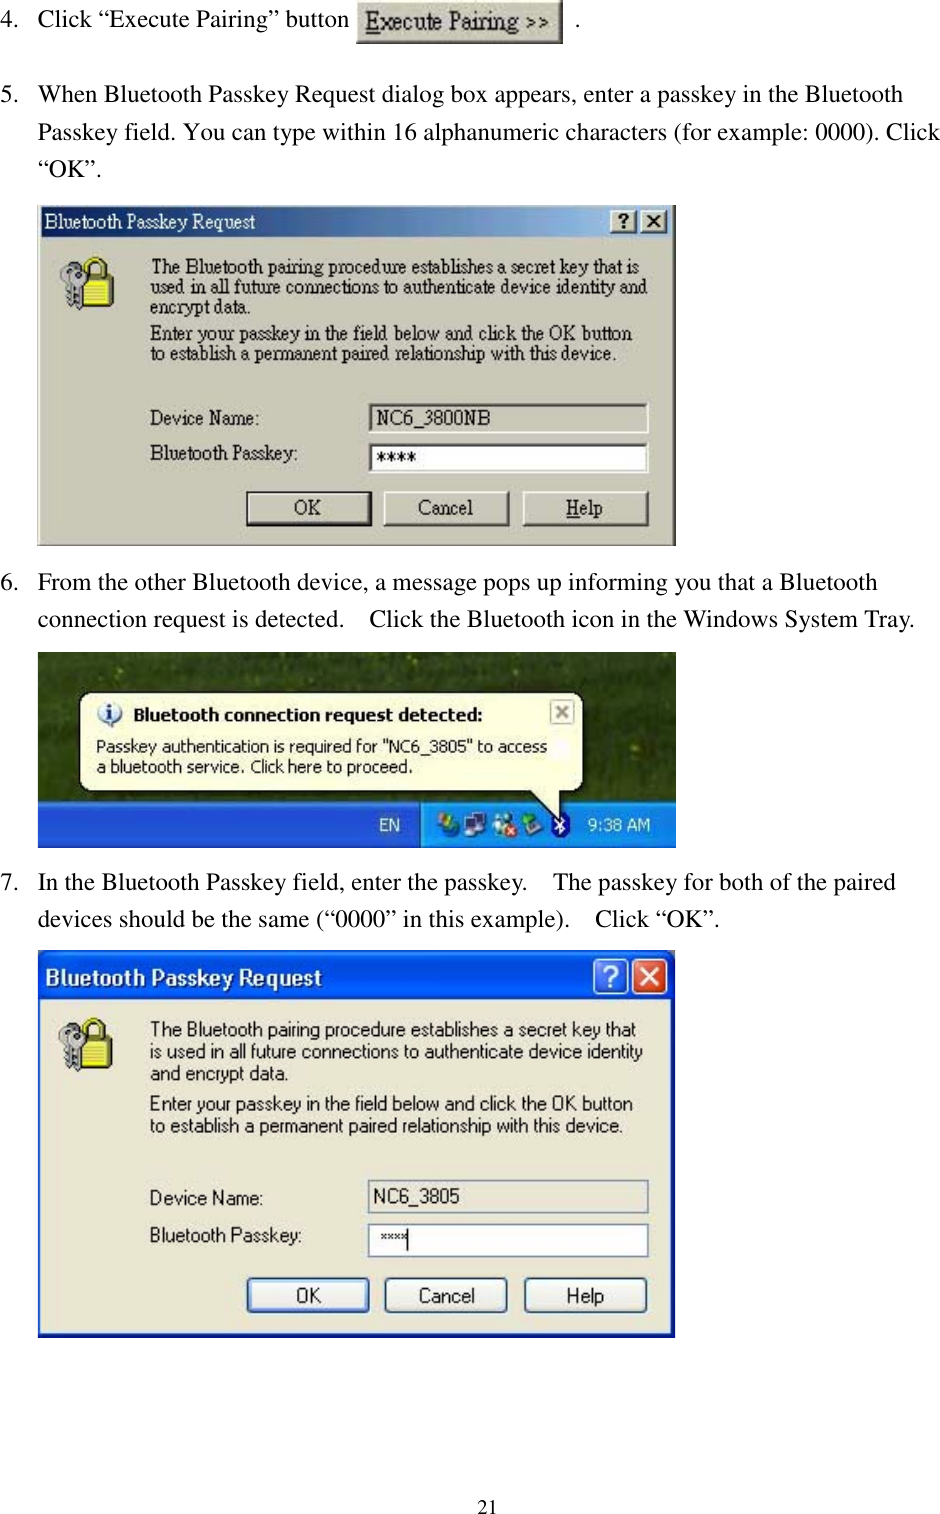 214. Click “Execute Pairing” button                  .5. When Bluetooth Passkey Request dialog box appears, enter a passkey in the BluetoothPasskey field. You can type within 16 alphanumeric characters (for example: 0000). Click“OK”.6. From the other Bluetooth device, a message pops up informing you that a Bluetoothconnection request is detected.    Click the Bluetooth icon in the Windows System Tray.7. In the Bluetooth Passkey field, enter the passkey.    The passkey for both of the paireddevices should be the same (“0000” in this example).    Click “OK”.